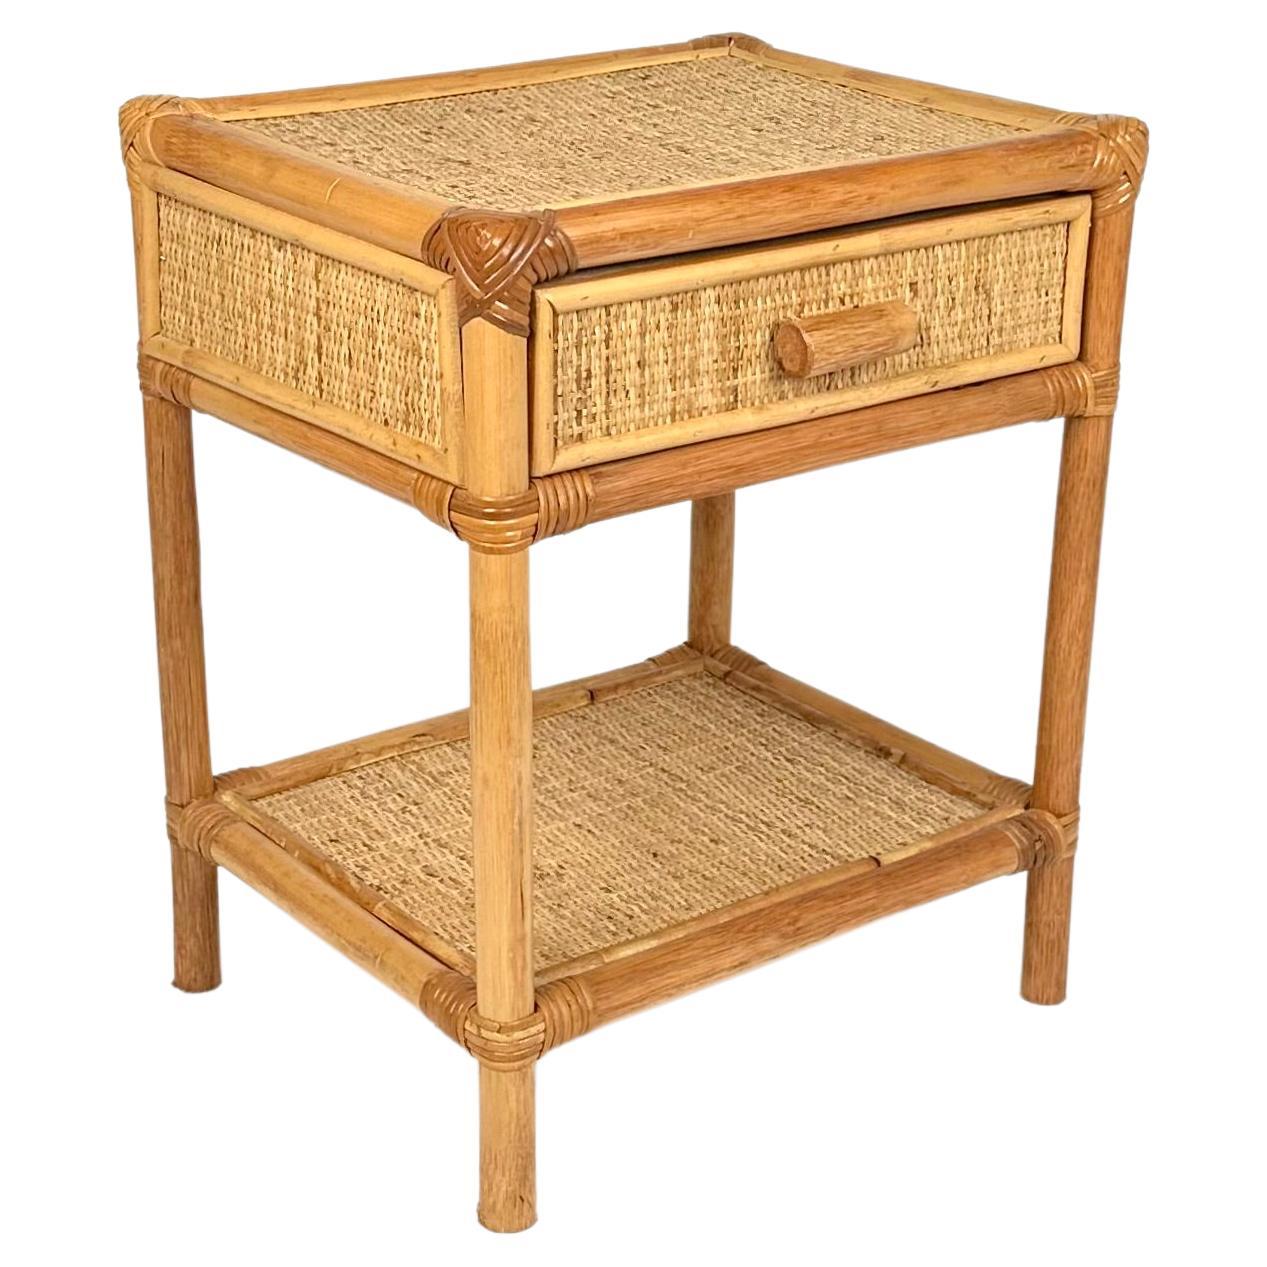 Midcentury Bedside Table Nightstand in Bamboo & Rattan, Italy, 1970s For Sale